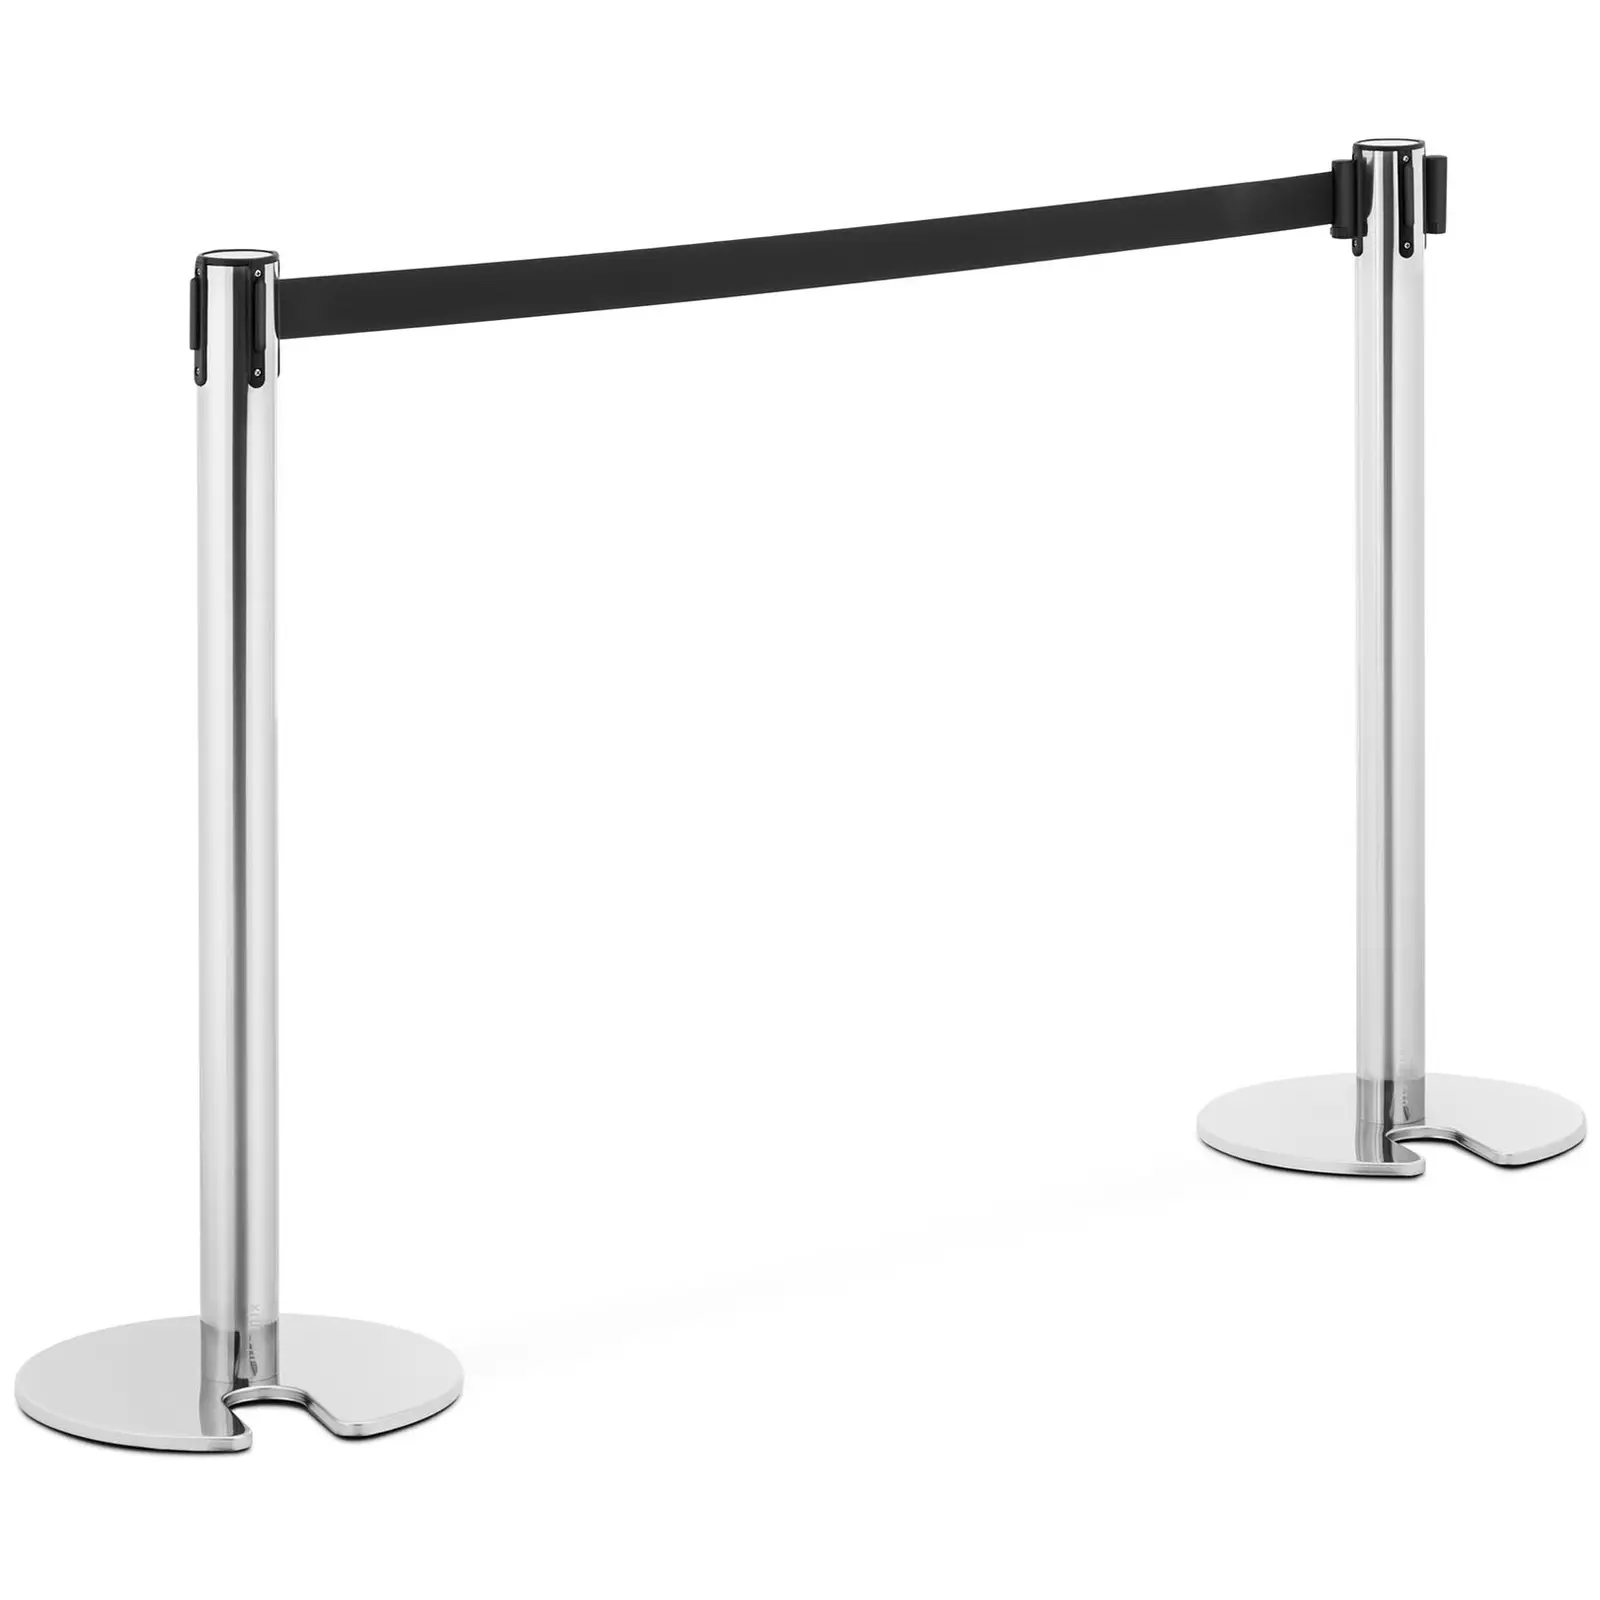 2 Barrier Stands - with strap - 200 cm - stainless steel - stand with notch